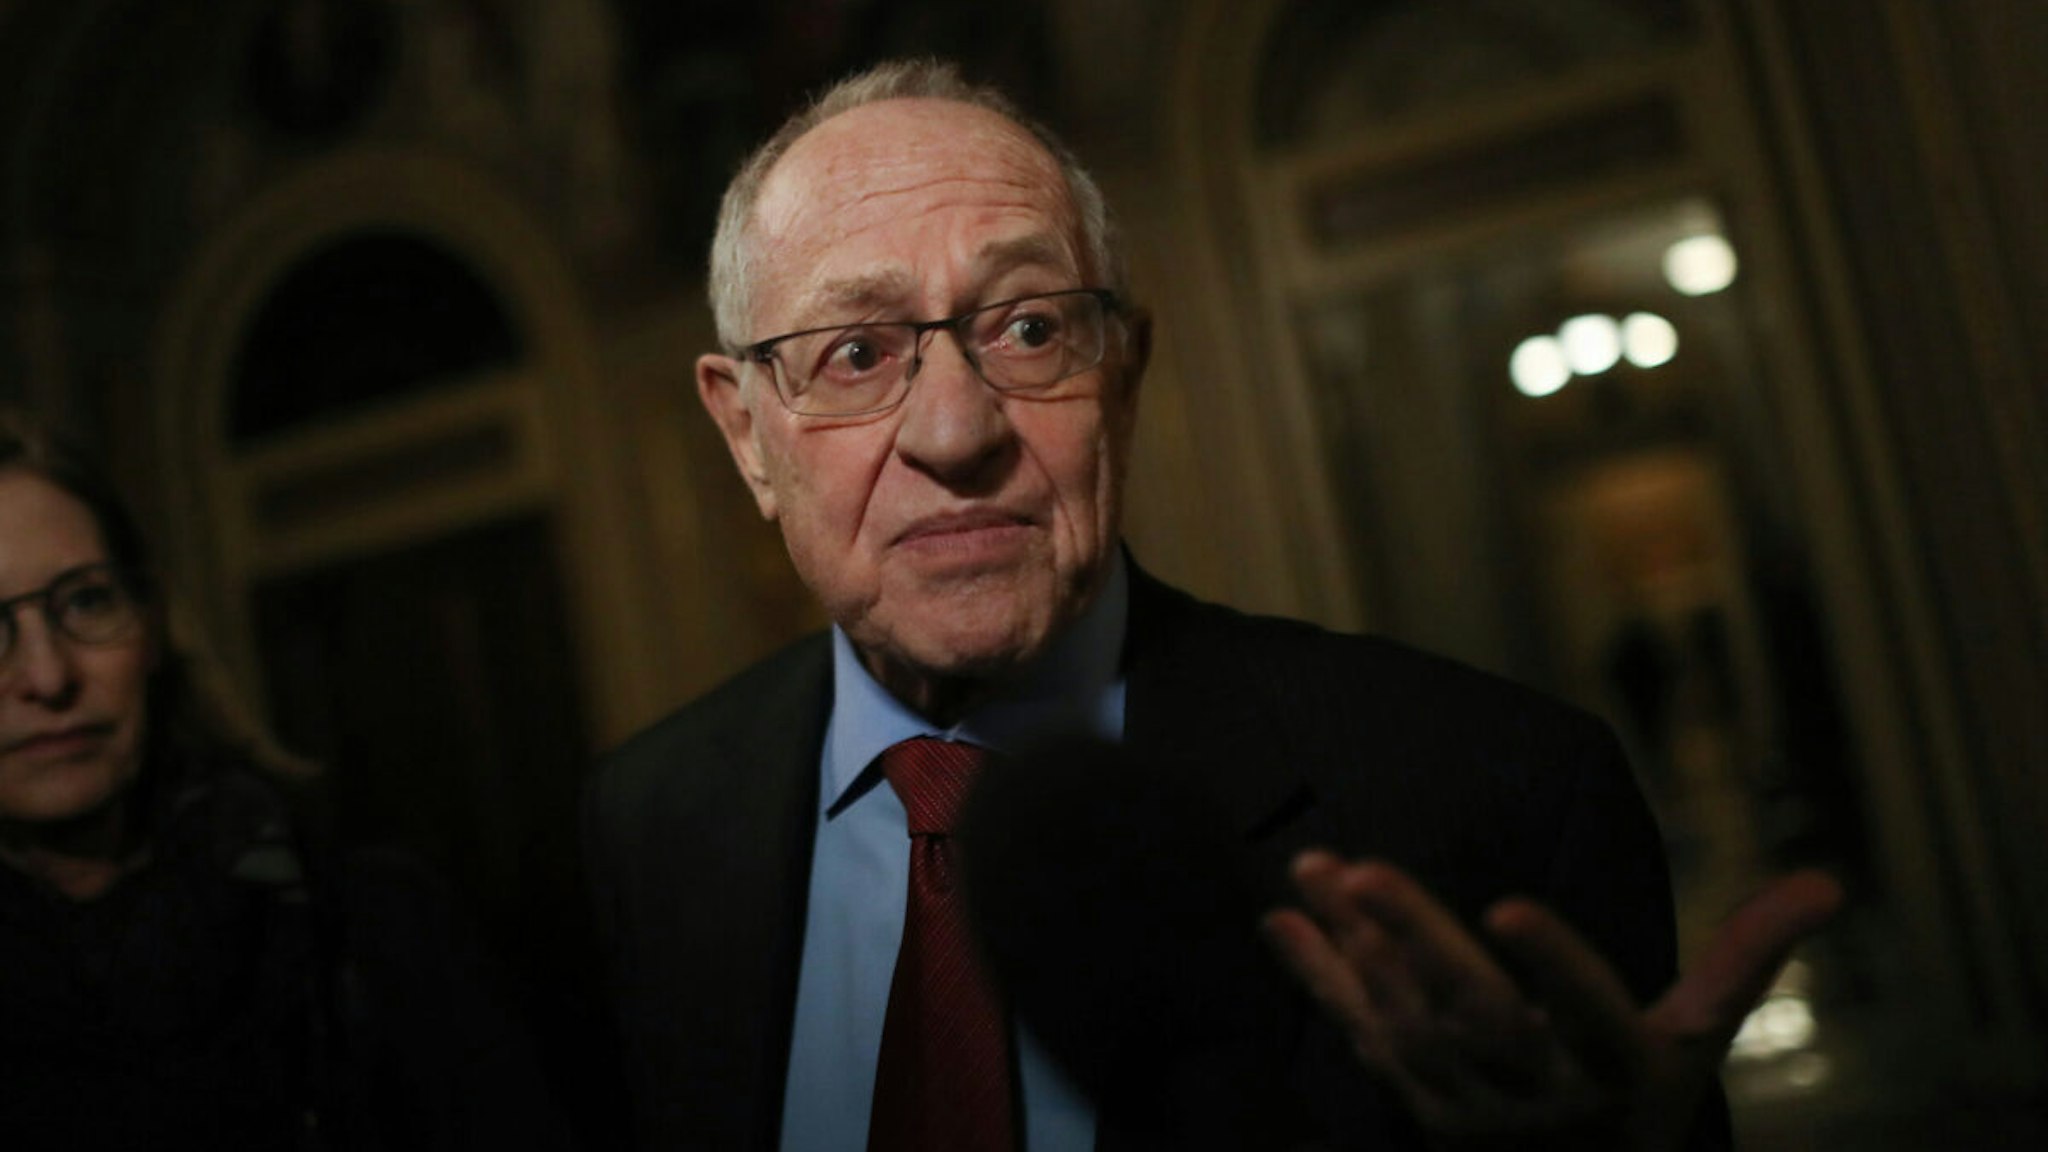 Attorney Alan Dershowitz, a member of President Donald Trump's legal team, speaks to the press in the Senate Reception Room during the Senate impeachment trial at the U.S. Capitol on January 29, 2020 in Washington, DC